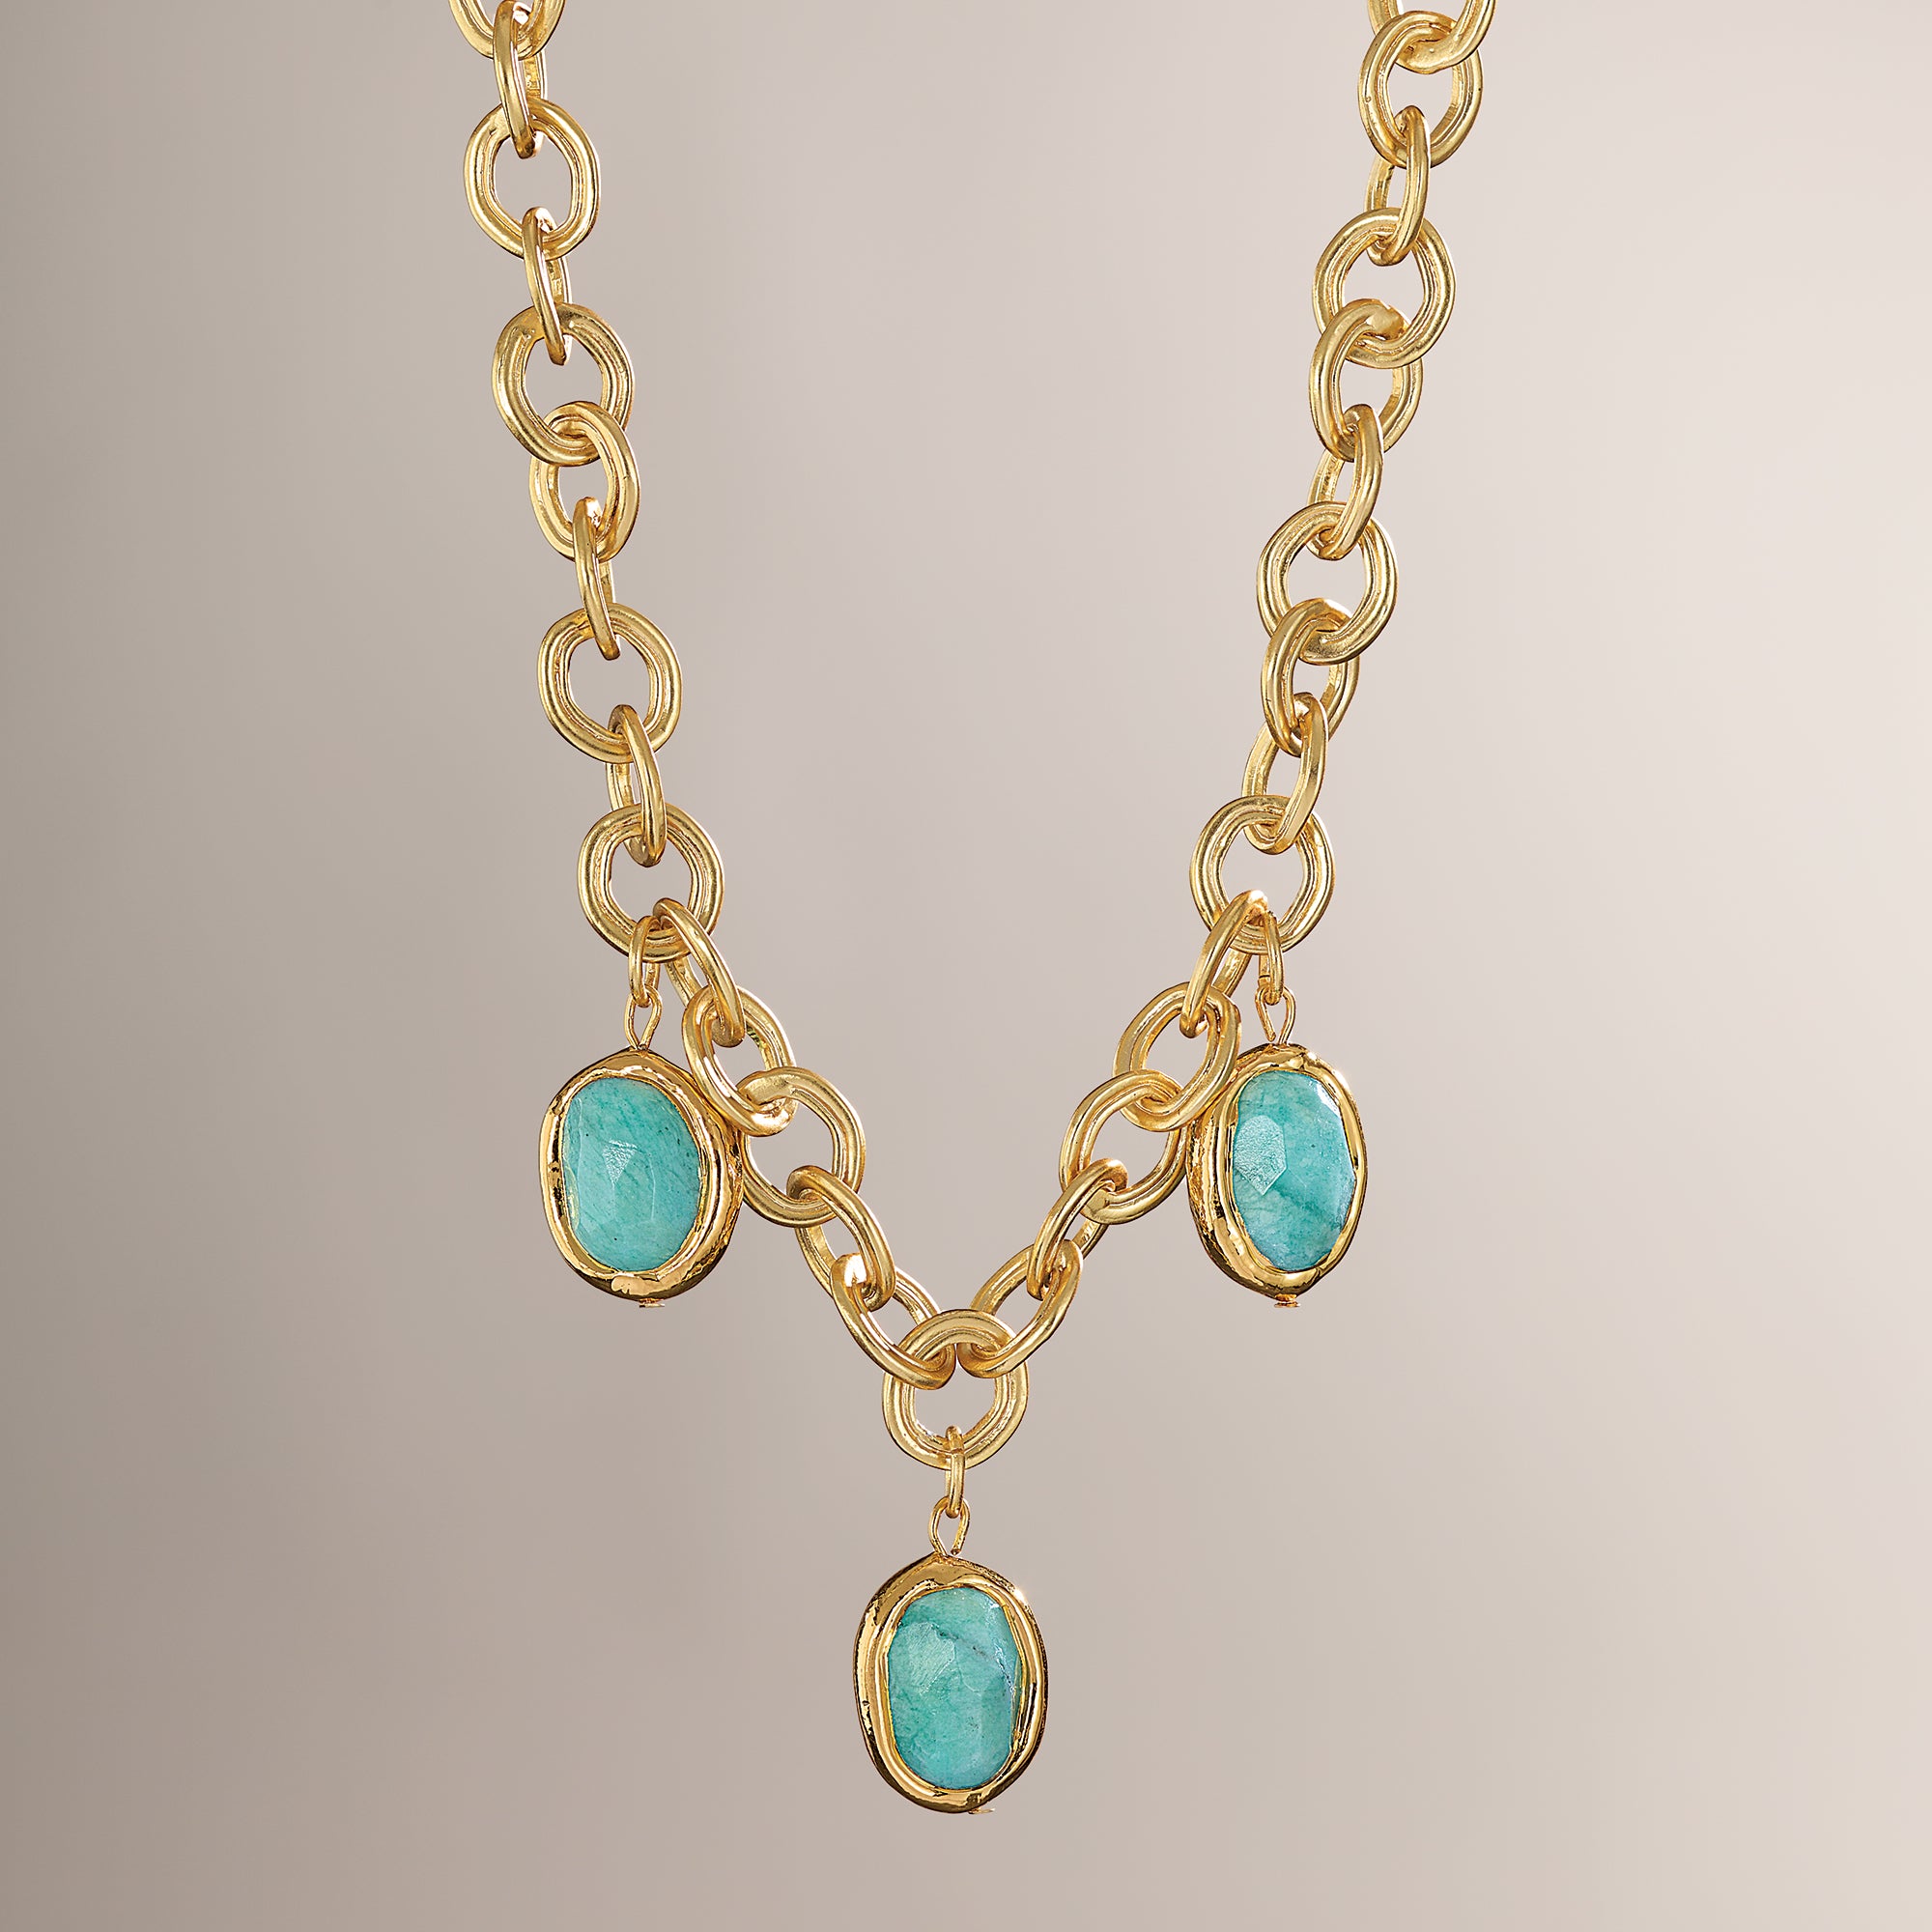 Simply Striking Amazonite Drop Necklace